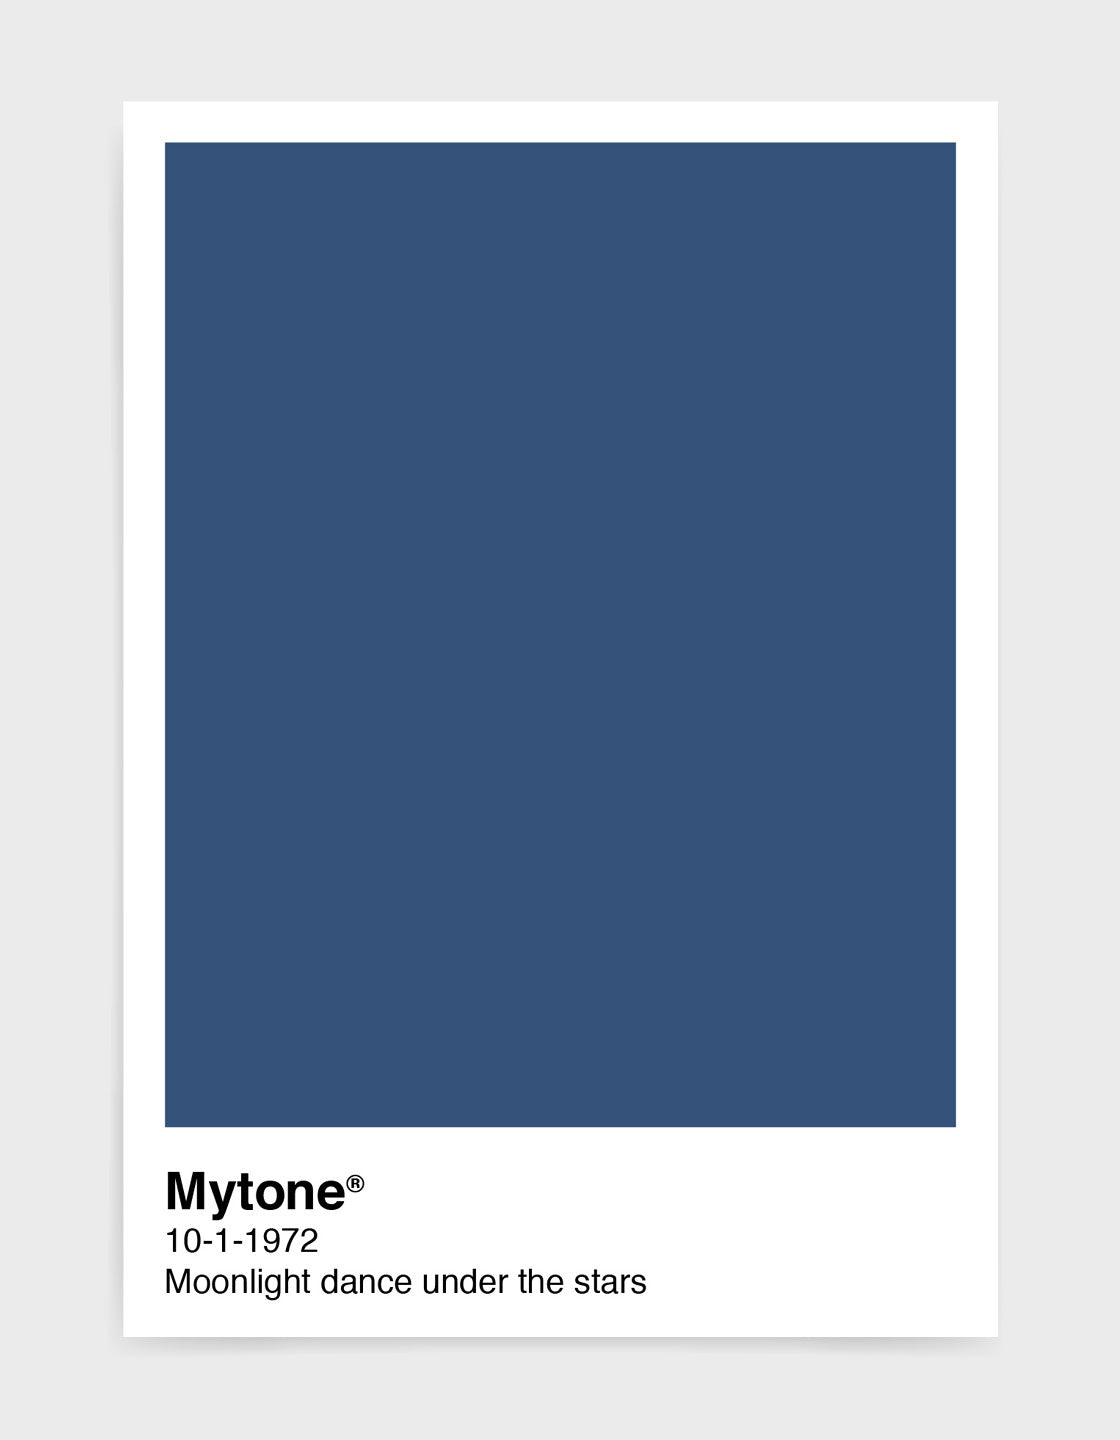 Pantone style art print with custom colour and text image shows dark blue print